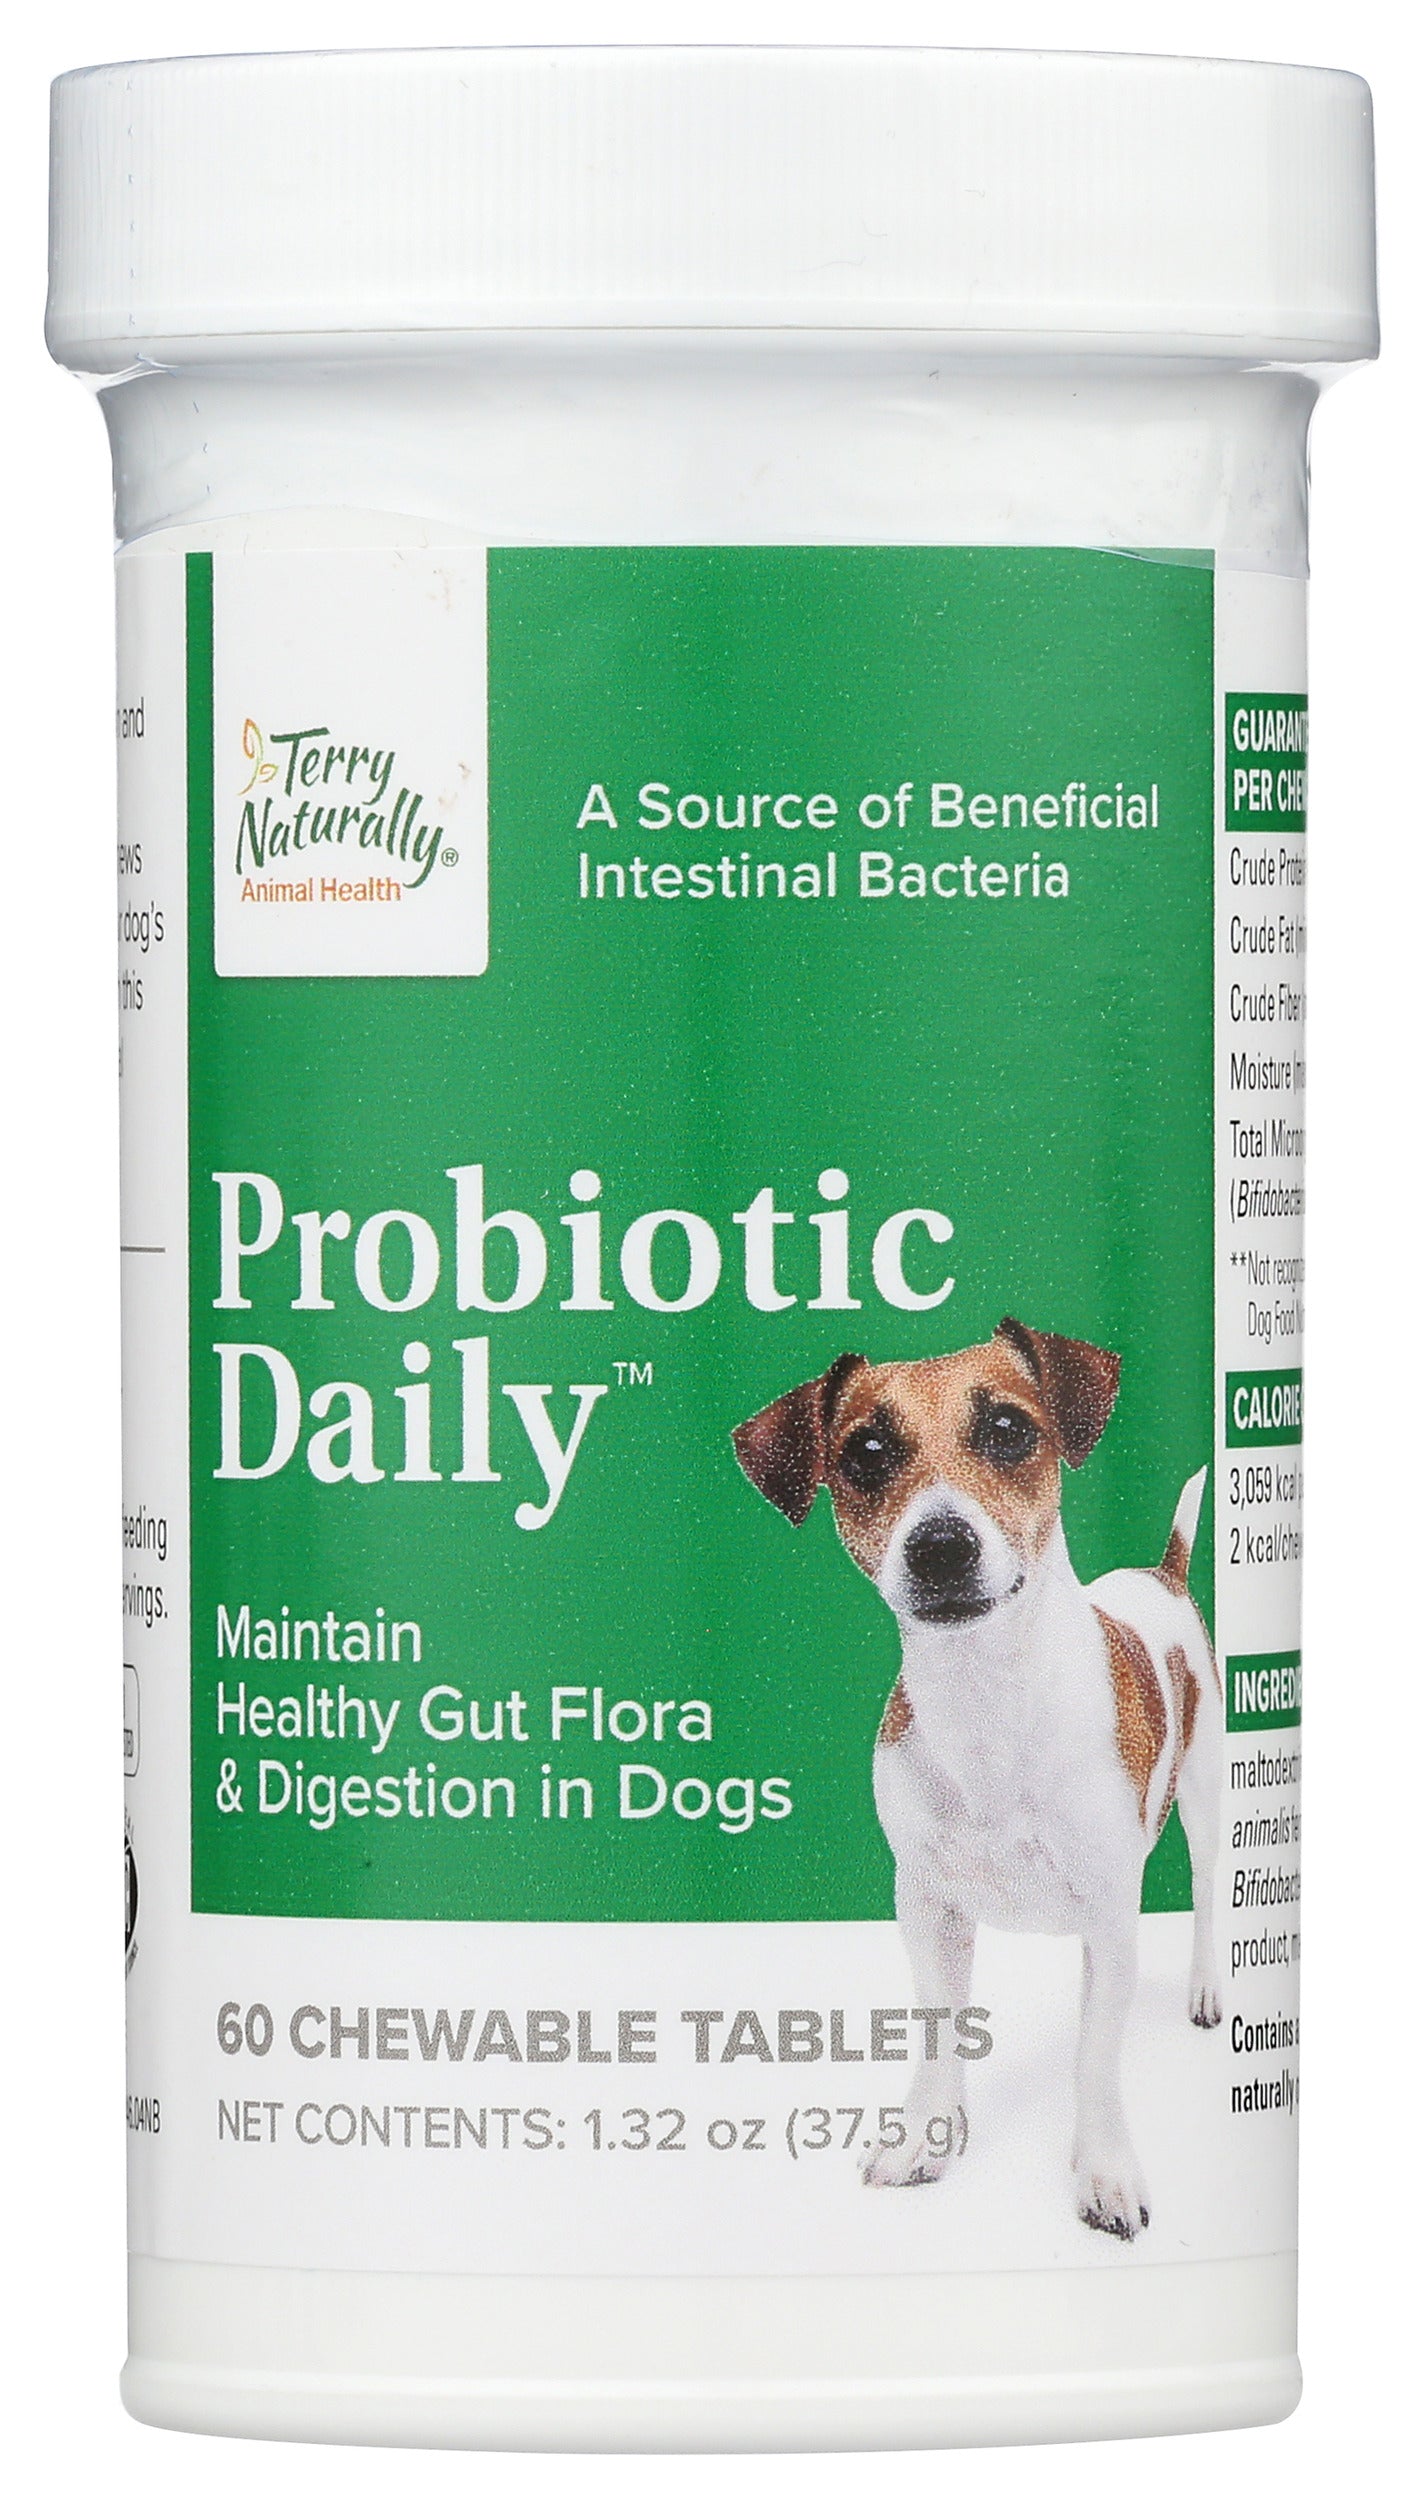 Terry Naturally Probiotic Daily 60 Chewable Tablets